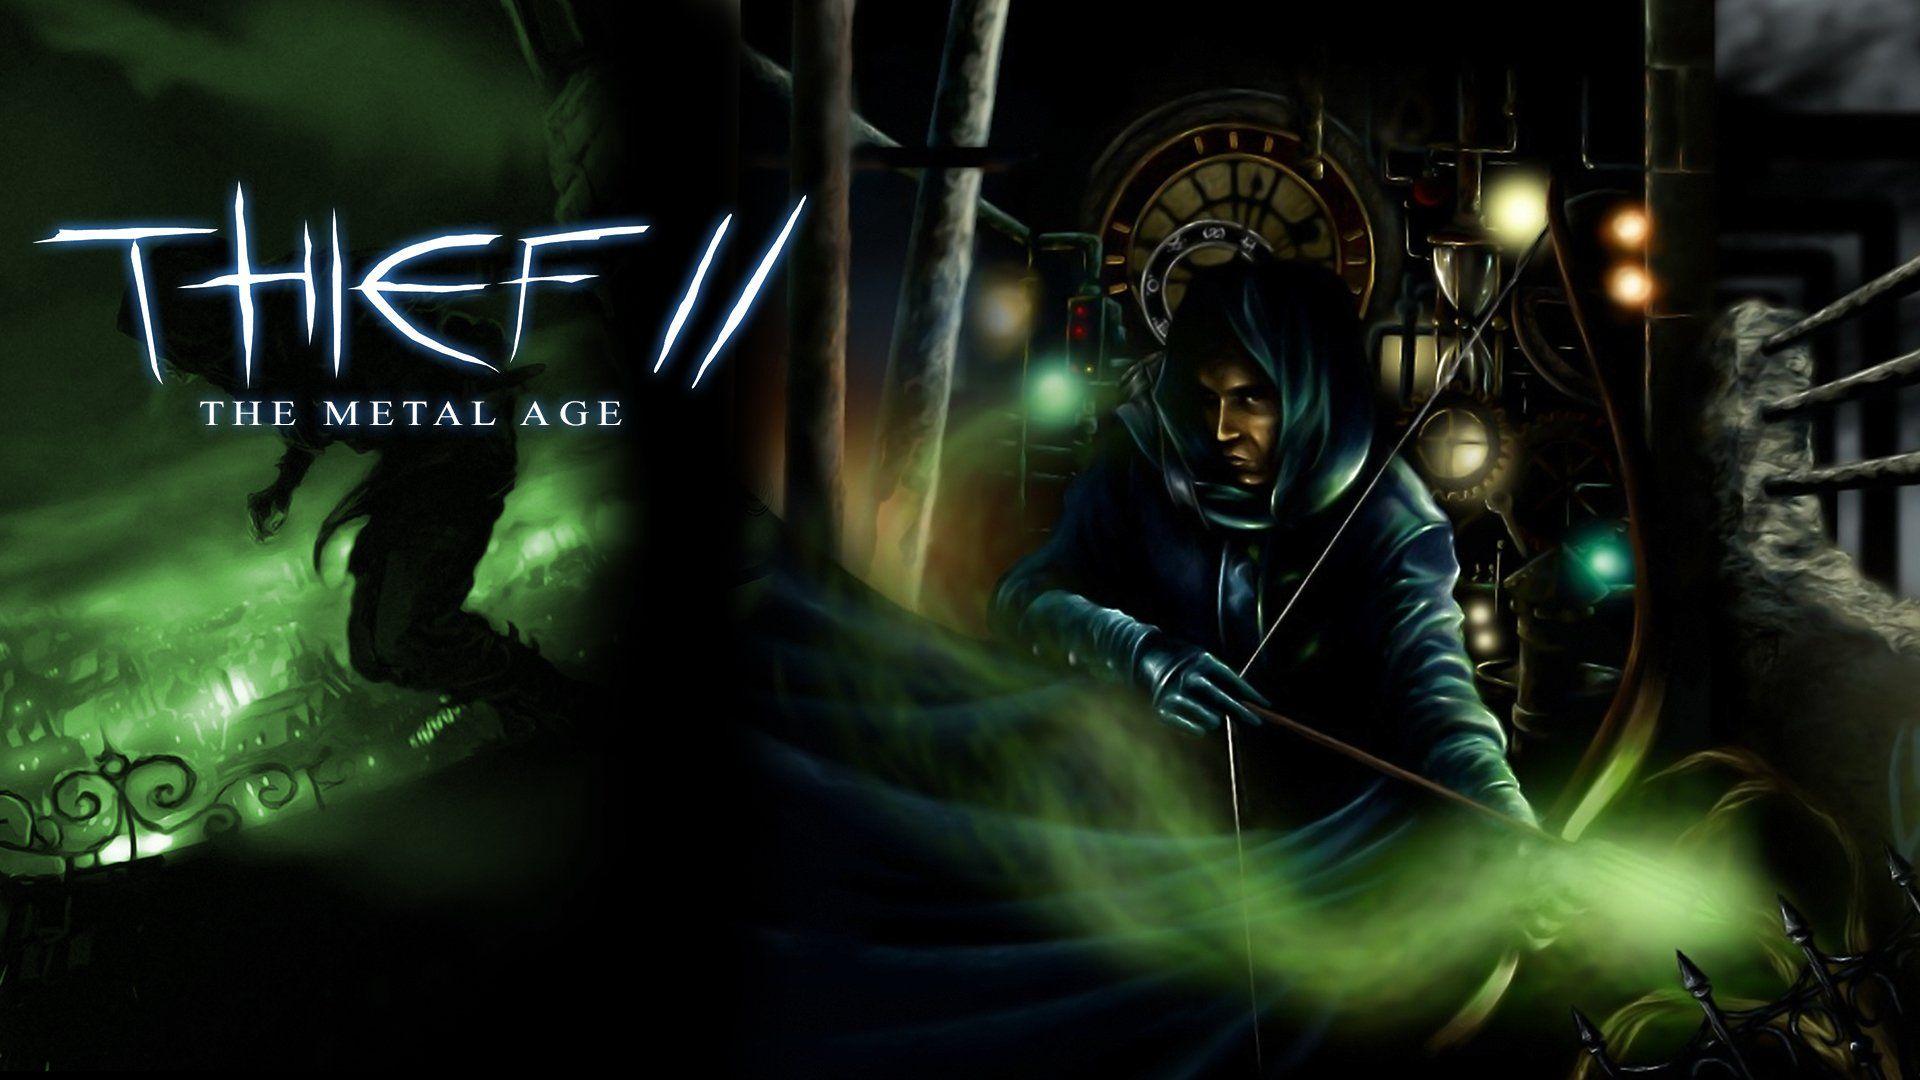 Thief II: The Metal Age HD Wallpaper. Background Imagex1080